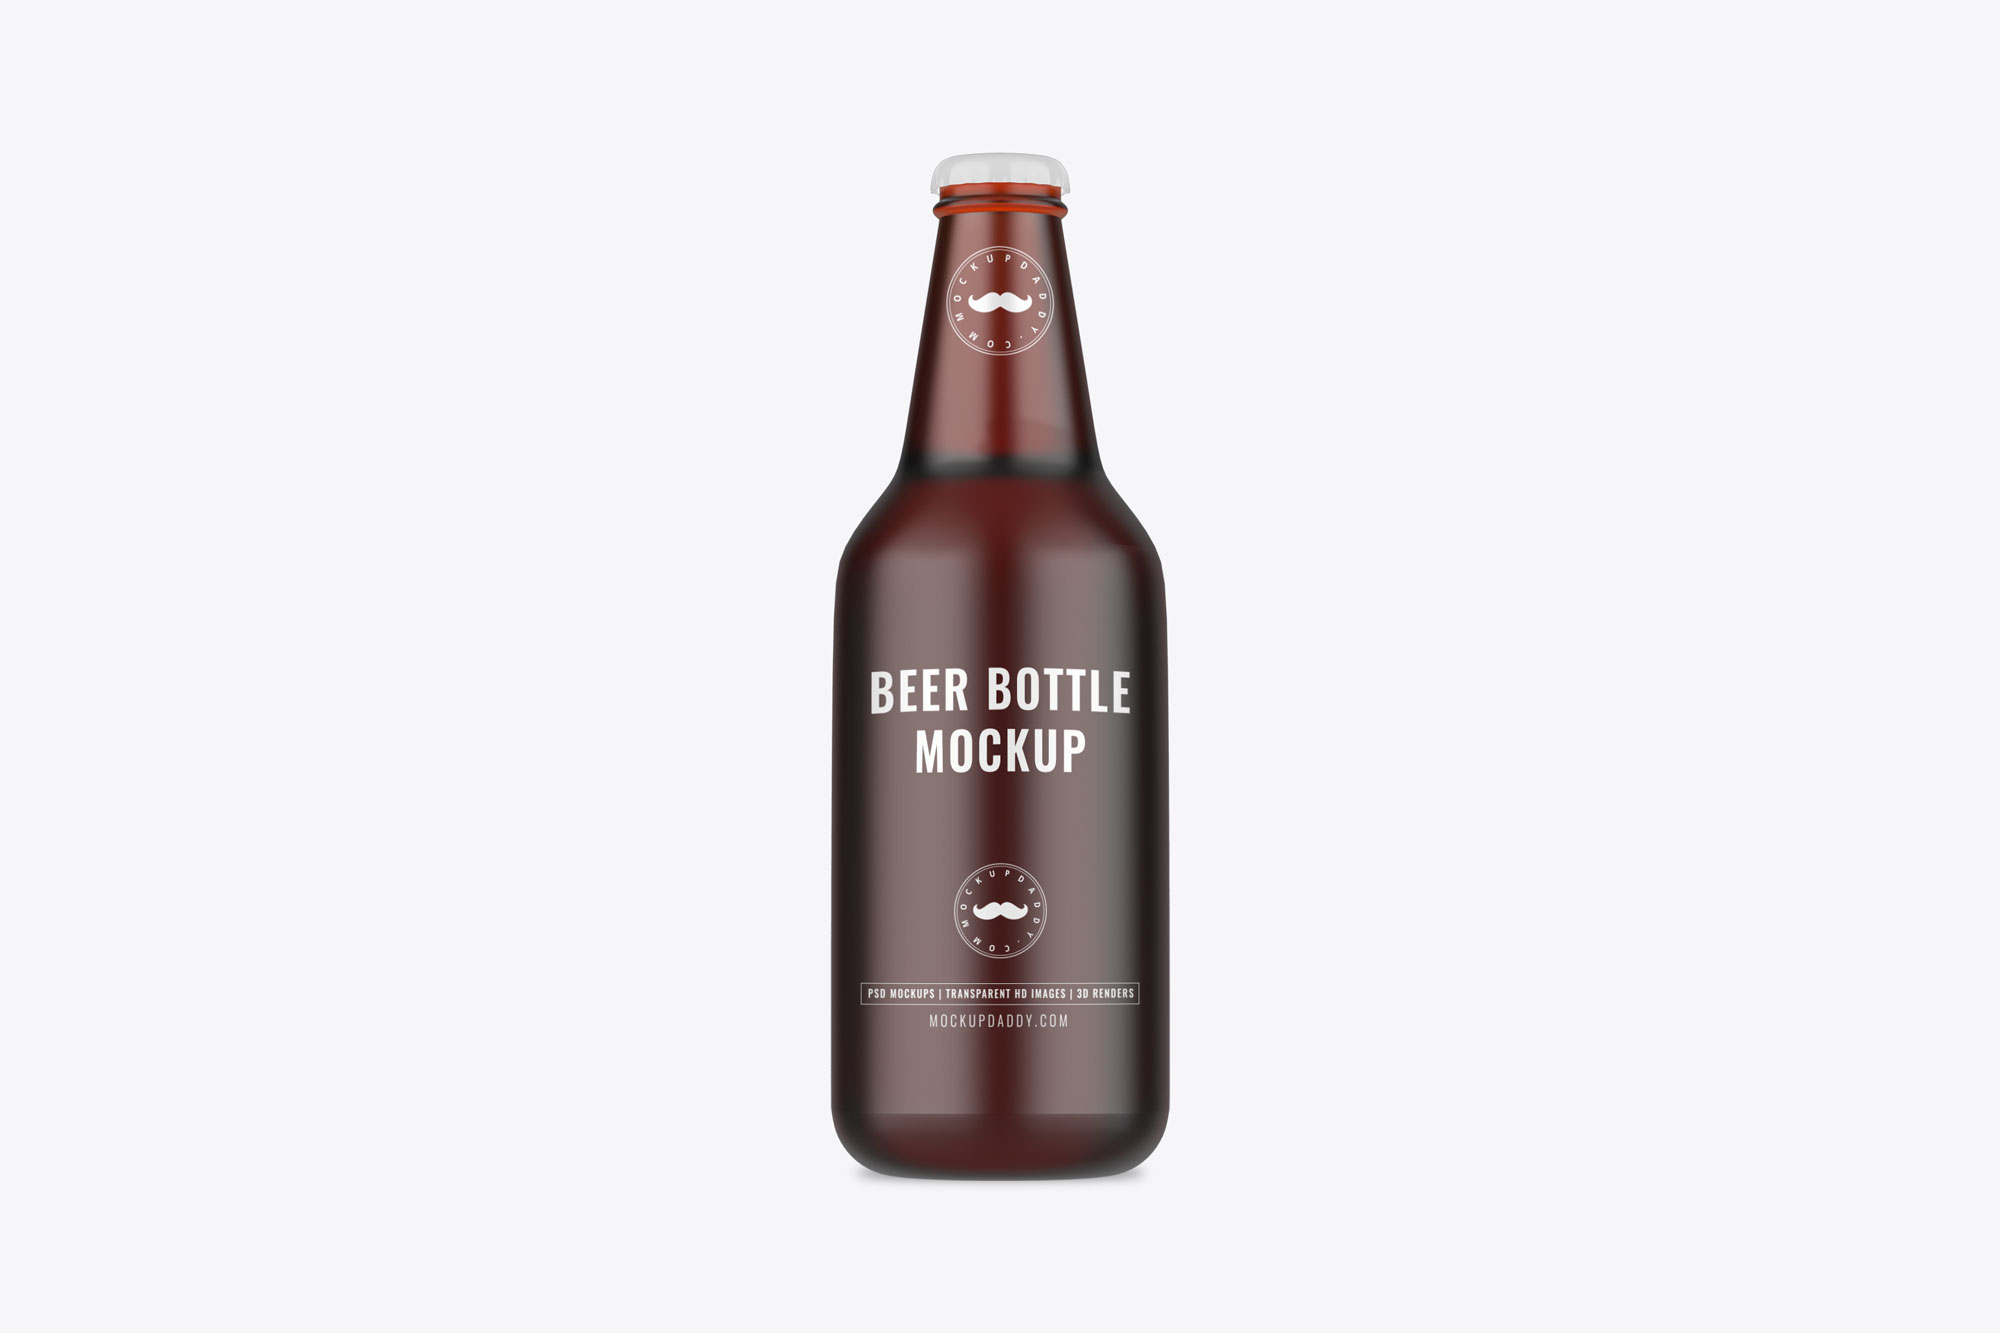 Black Beer Bottle Mockup with Clear Label and white cap.